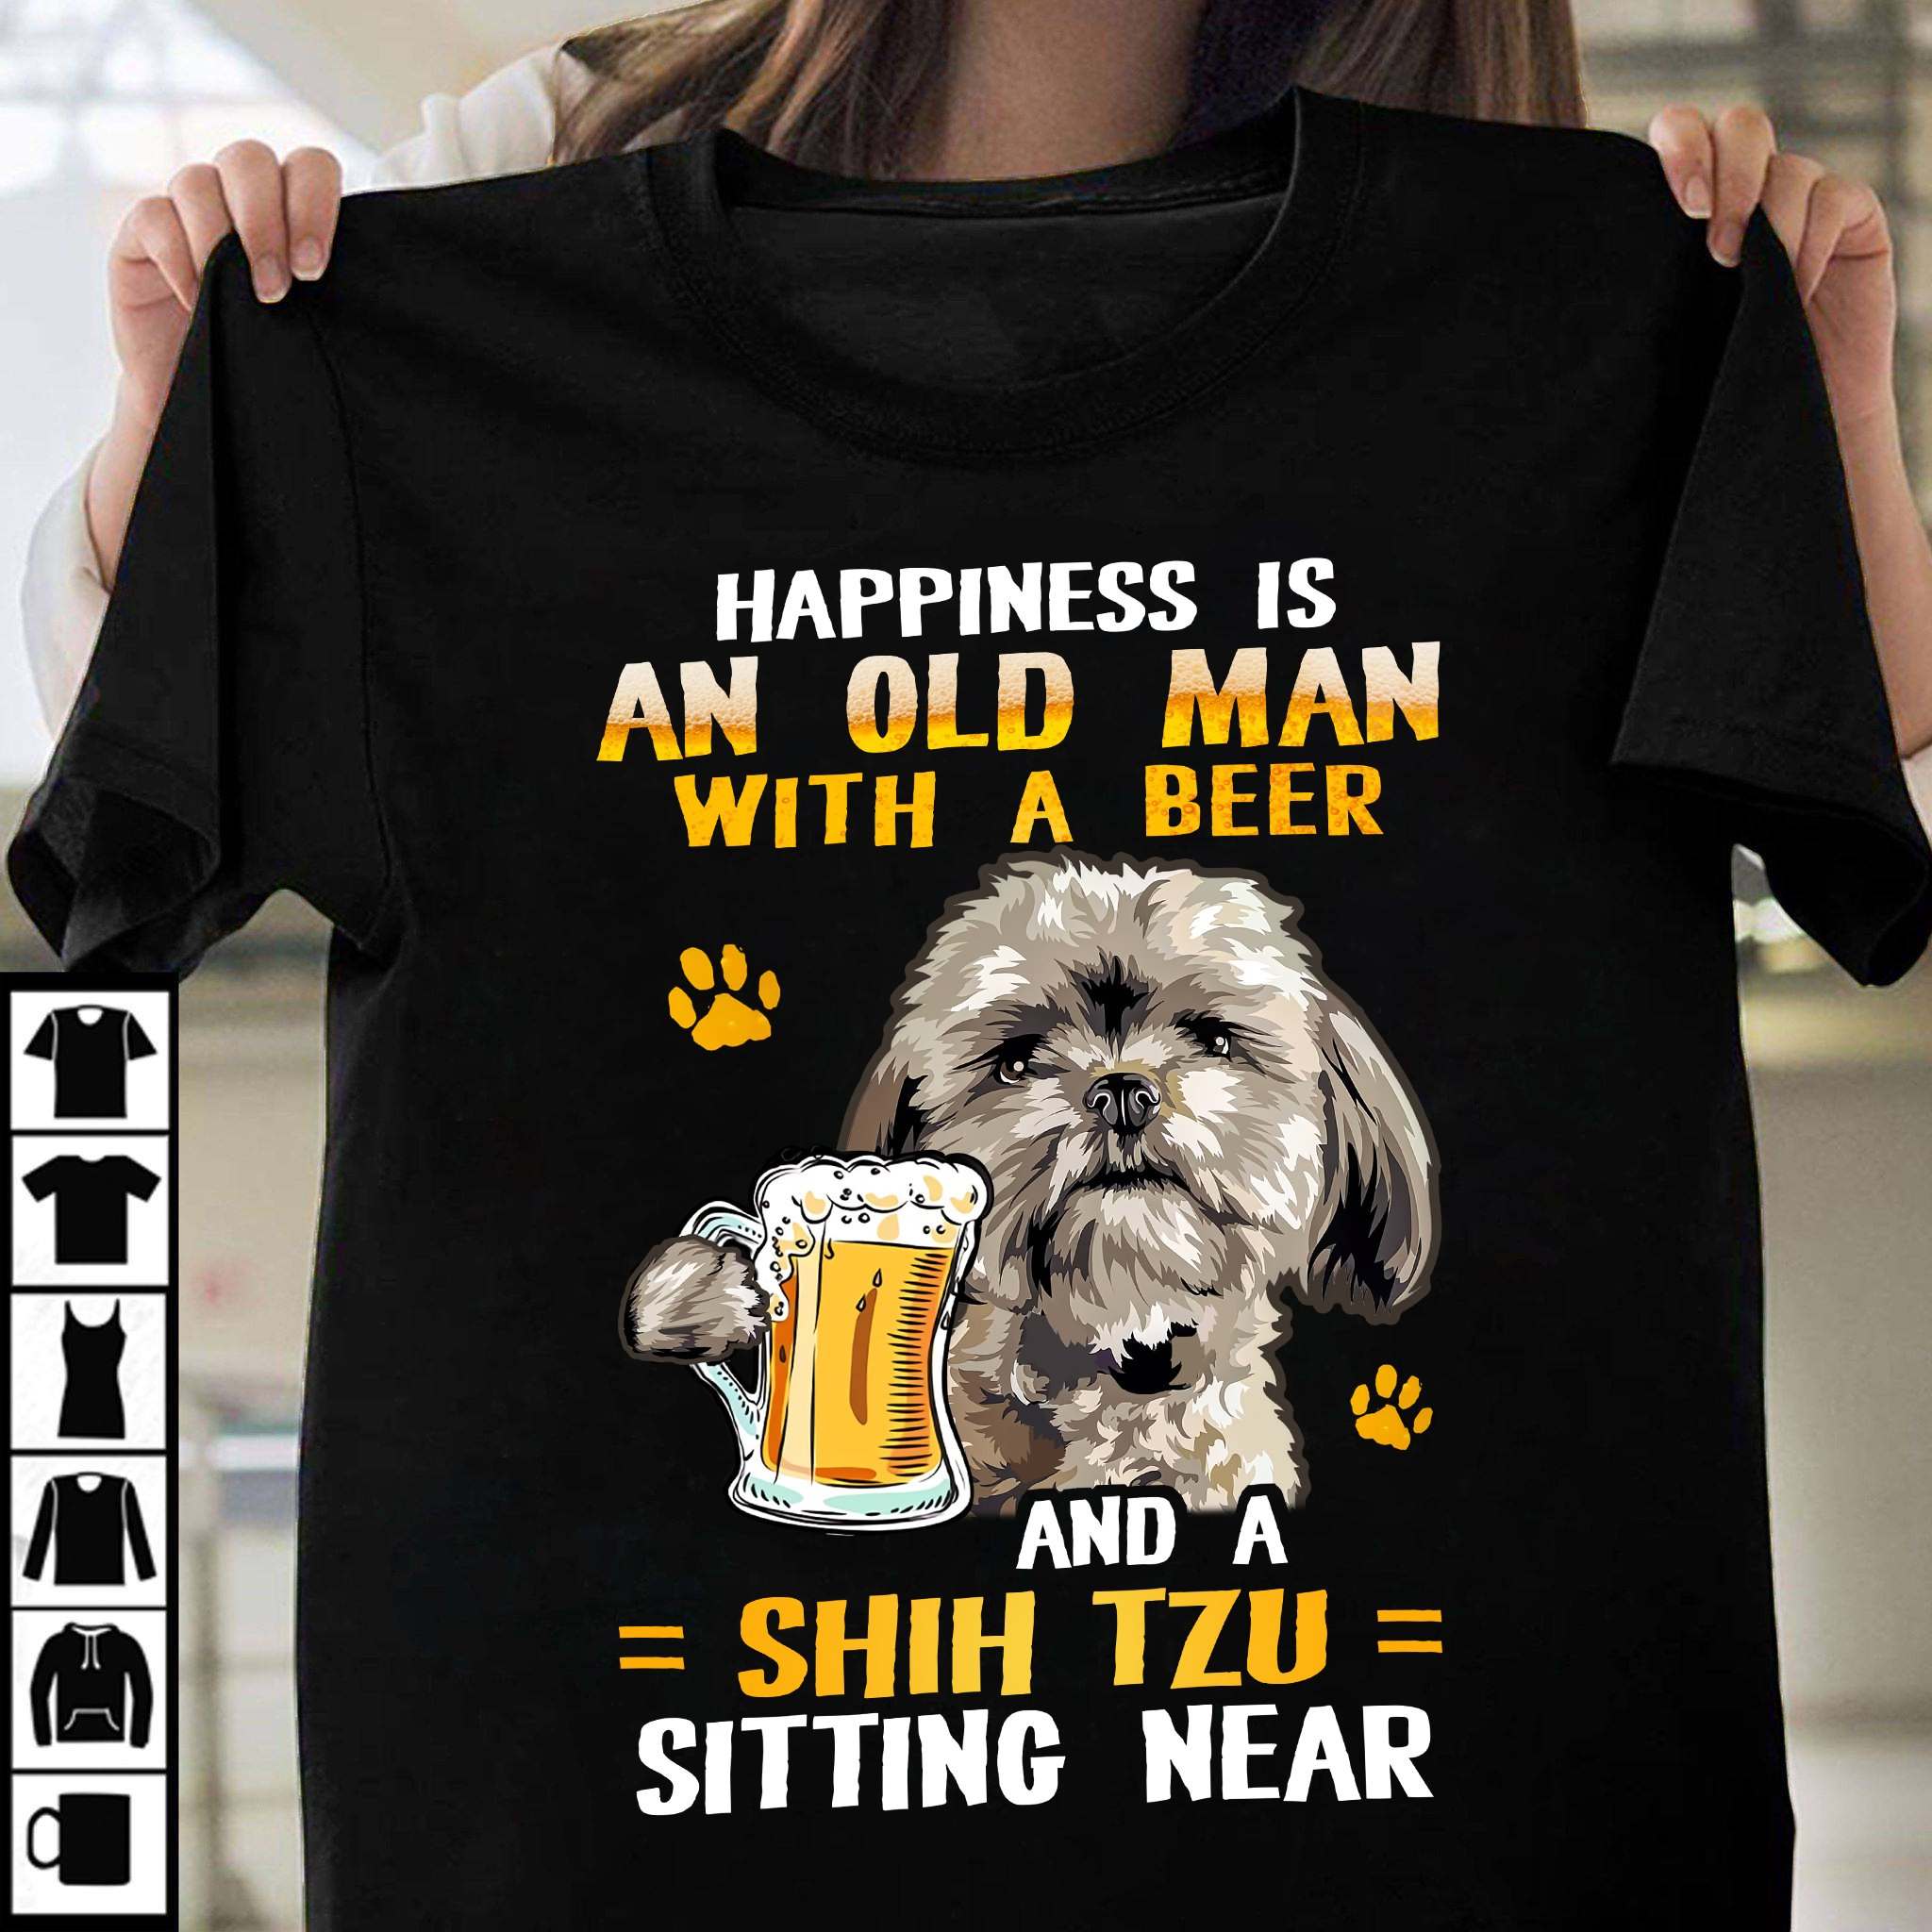 Happiness is an old man with a beer and a Shih Tzu sitting near - Dog and beer